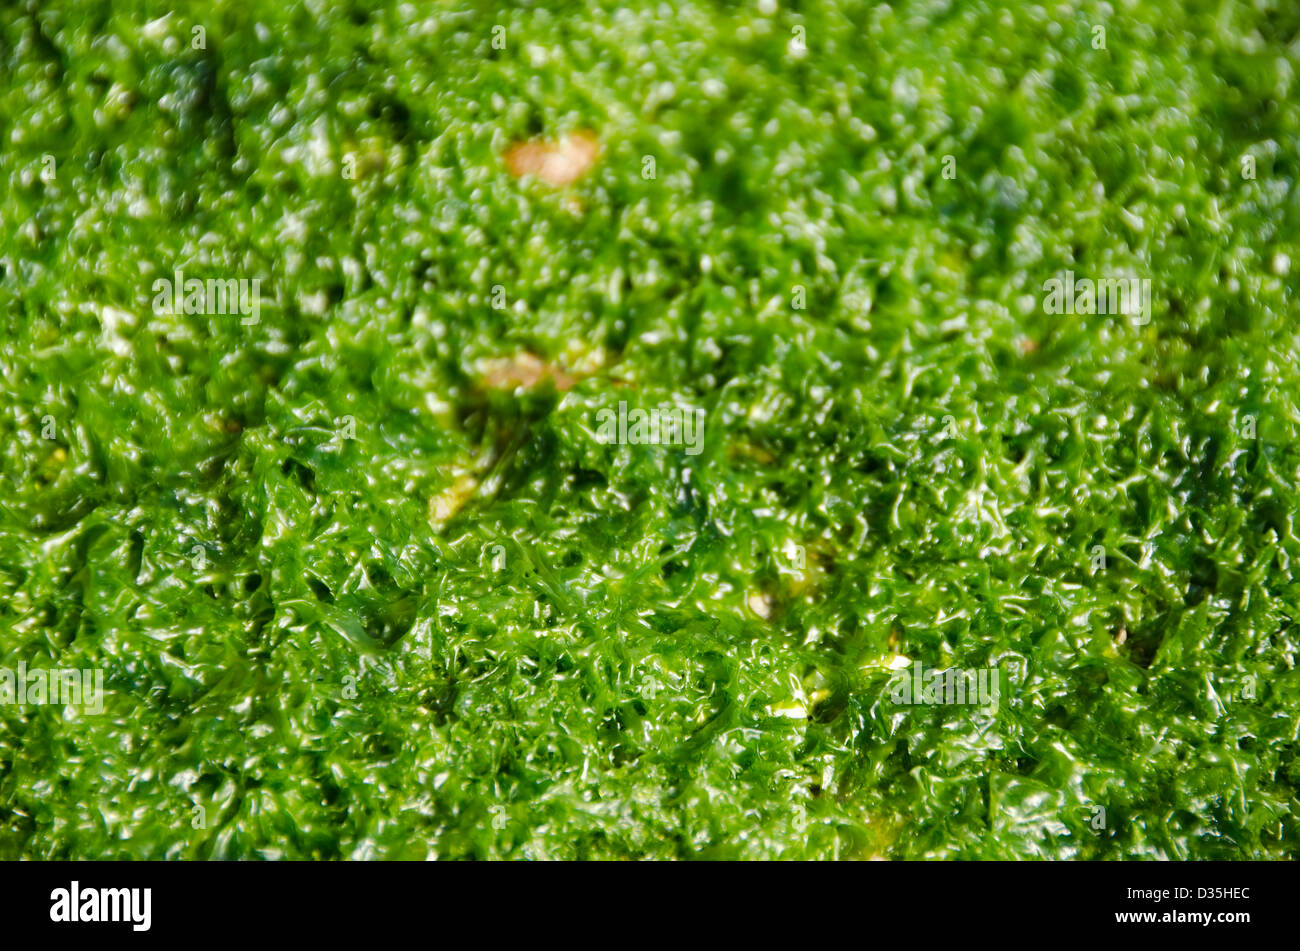 Green algae background on the rocky surface of a tidal flat in Japan Stock Photo